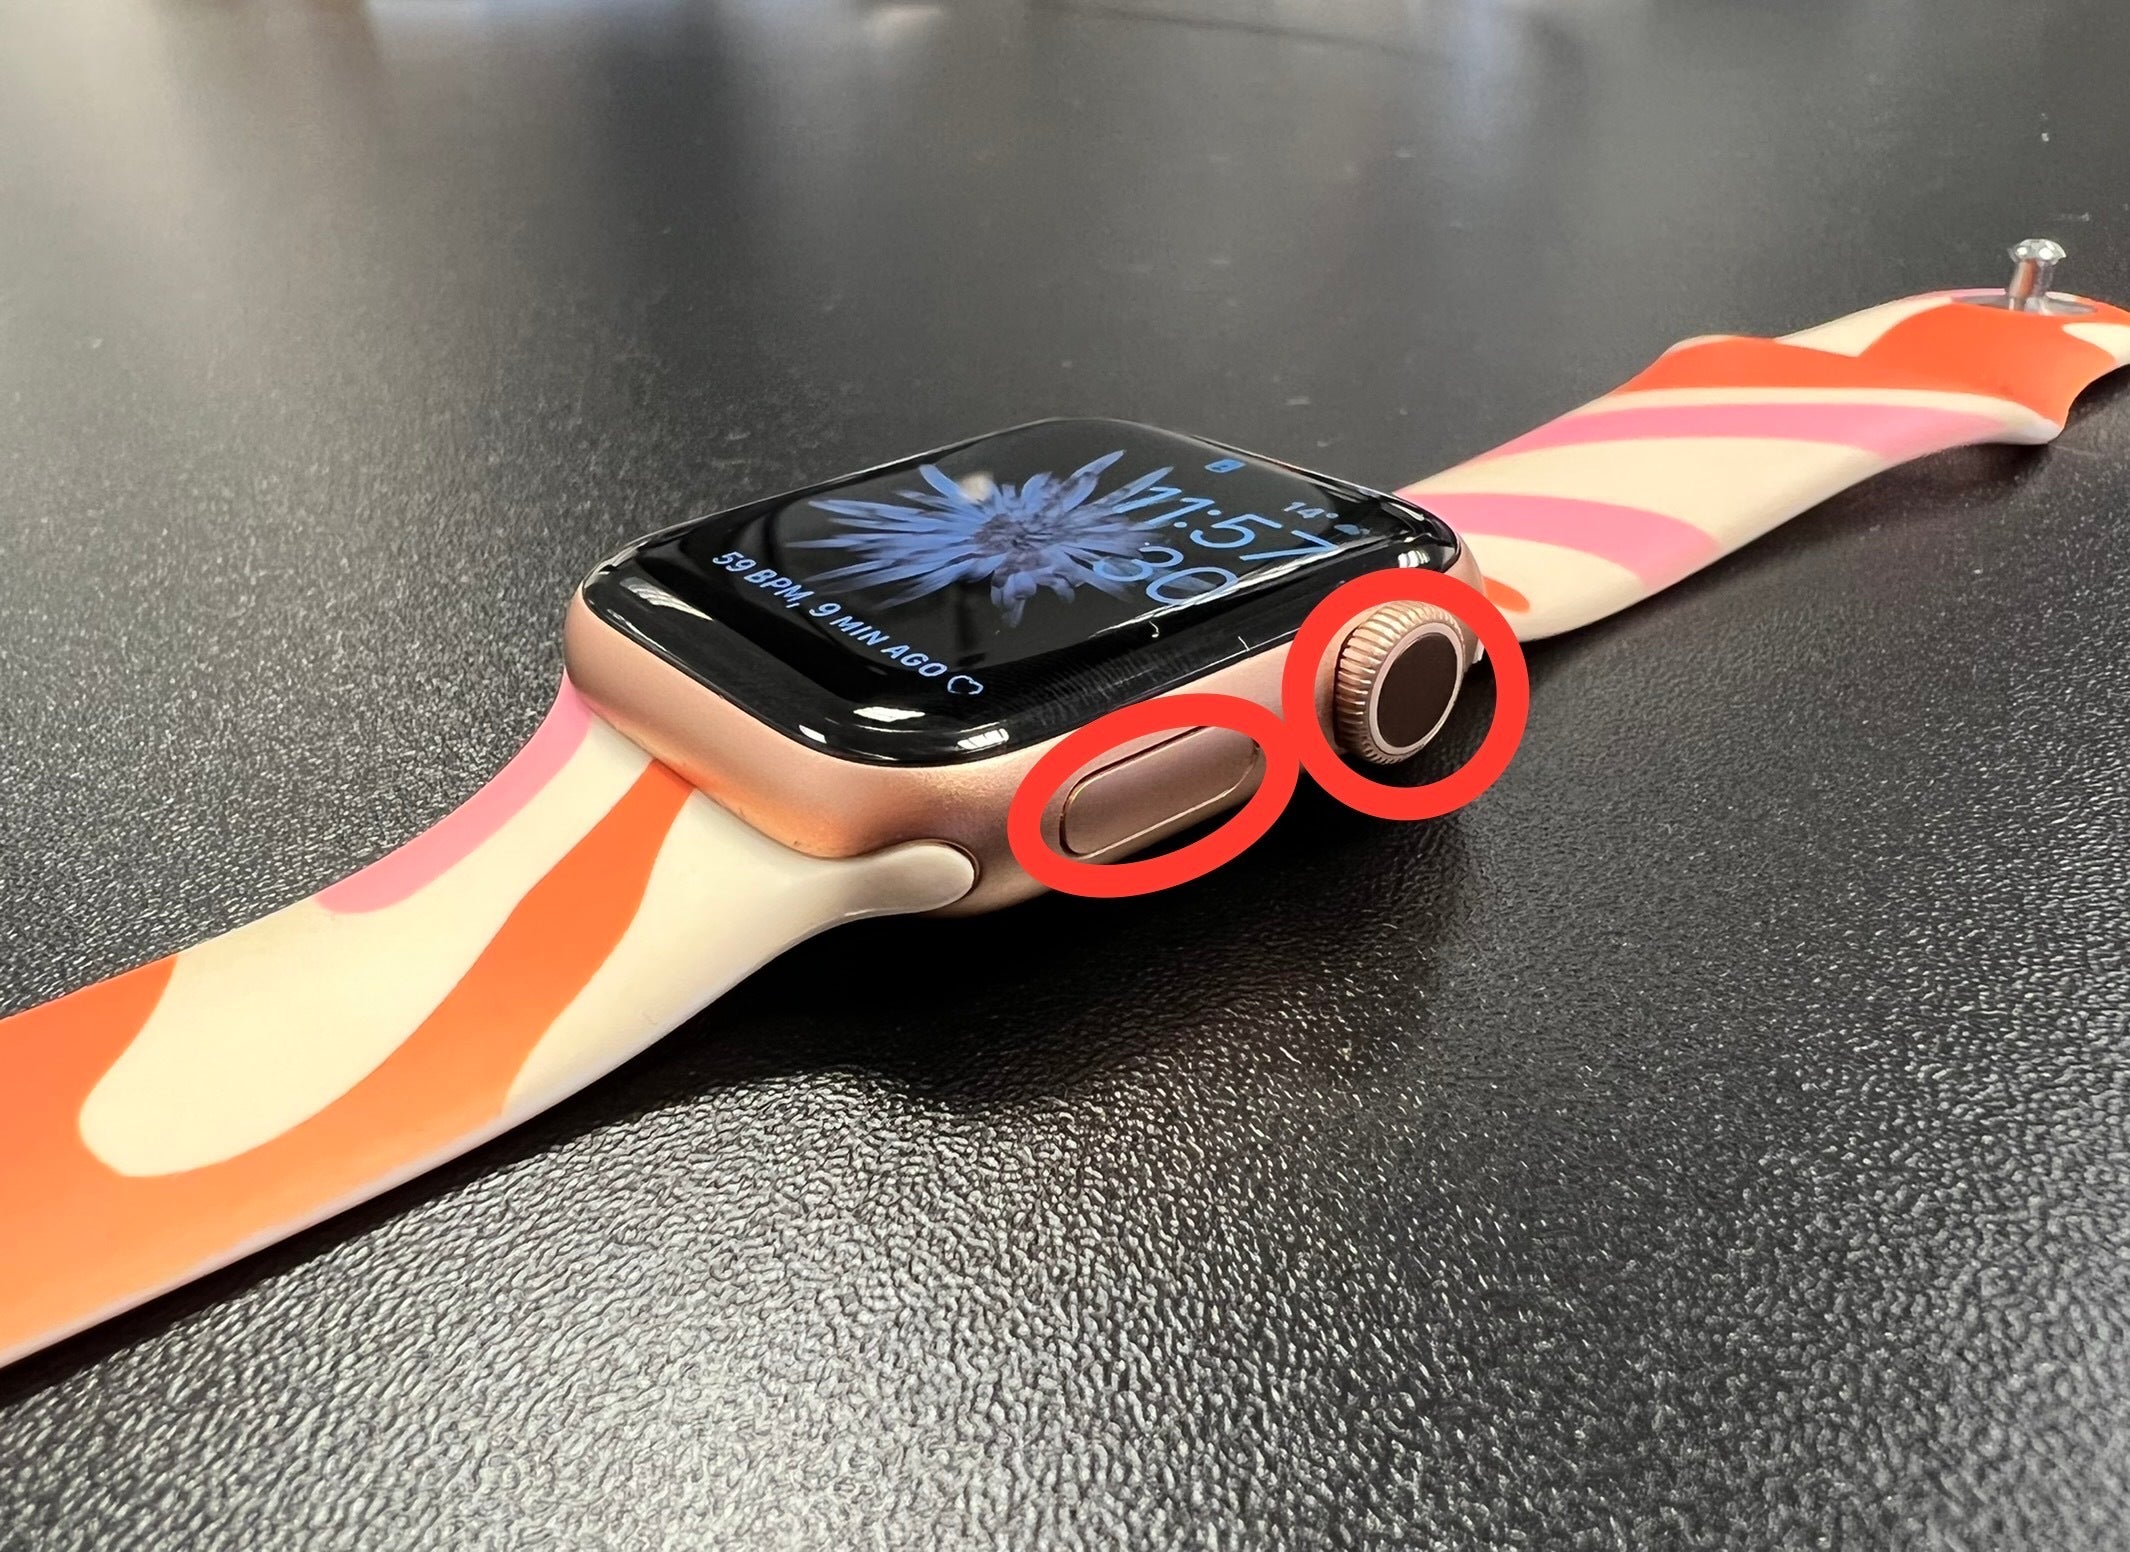 The Digital Crown and Side button on the Apple Watch 6